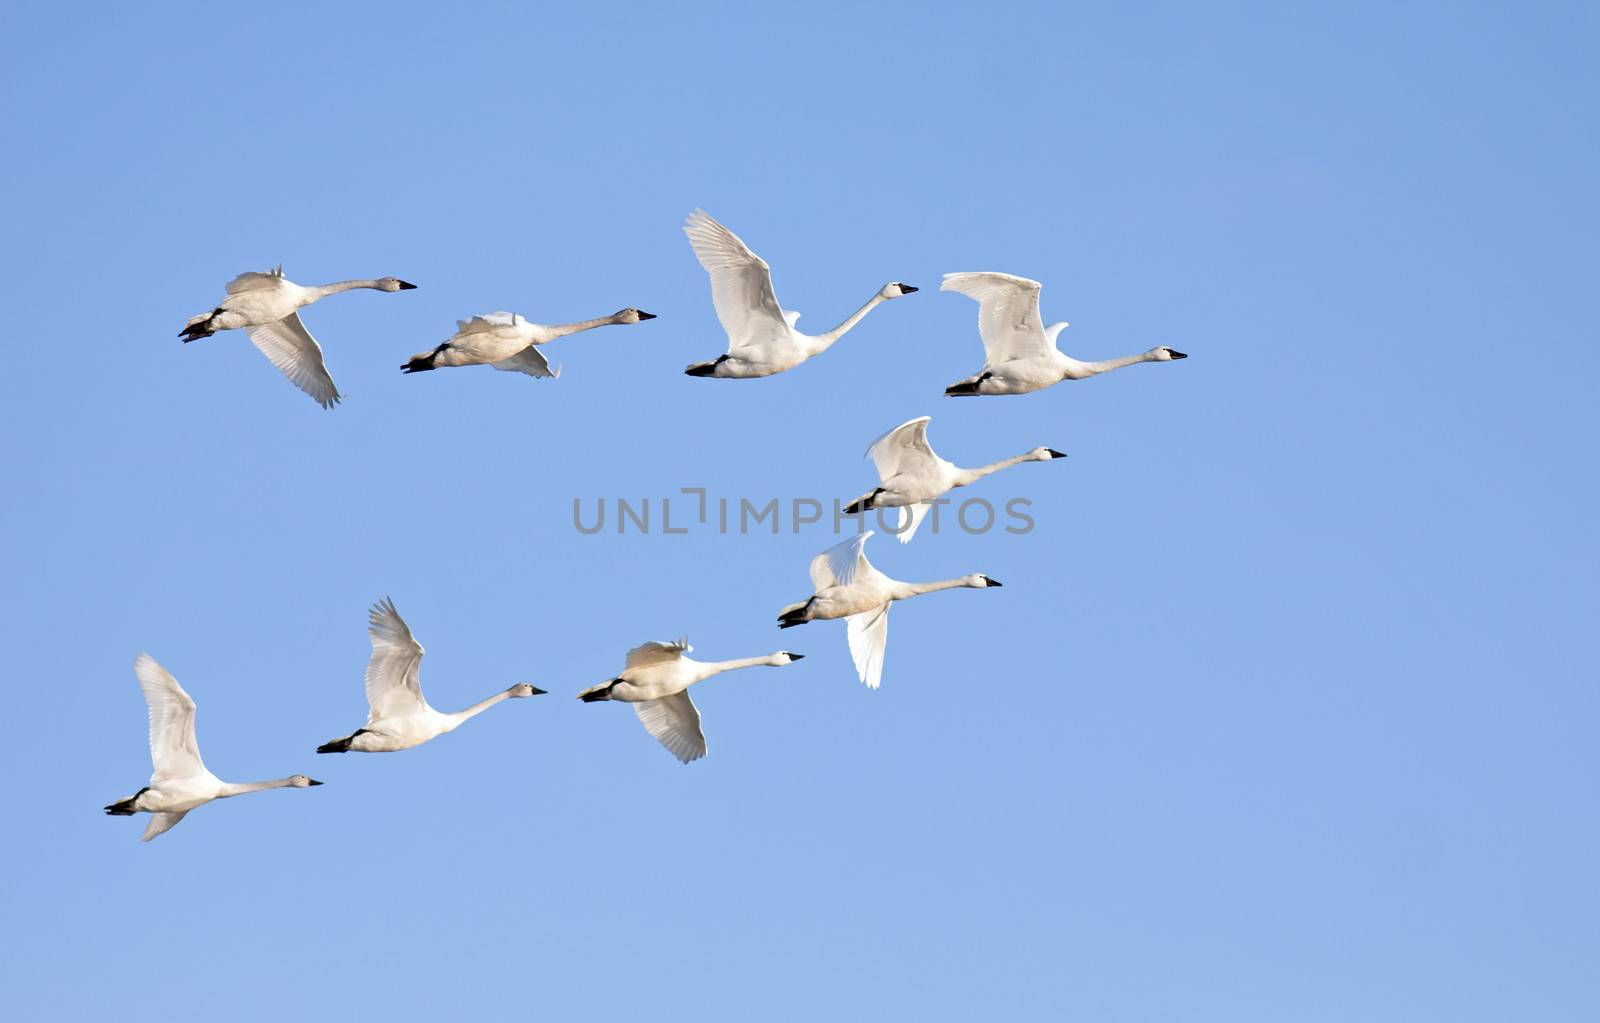 Tundra Swans flying in formation on a clear winter day.